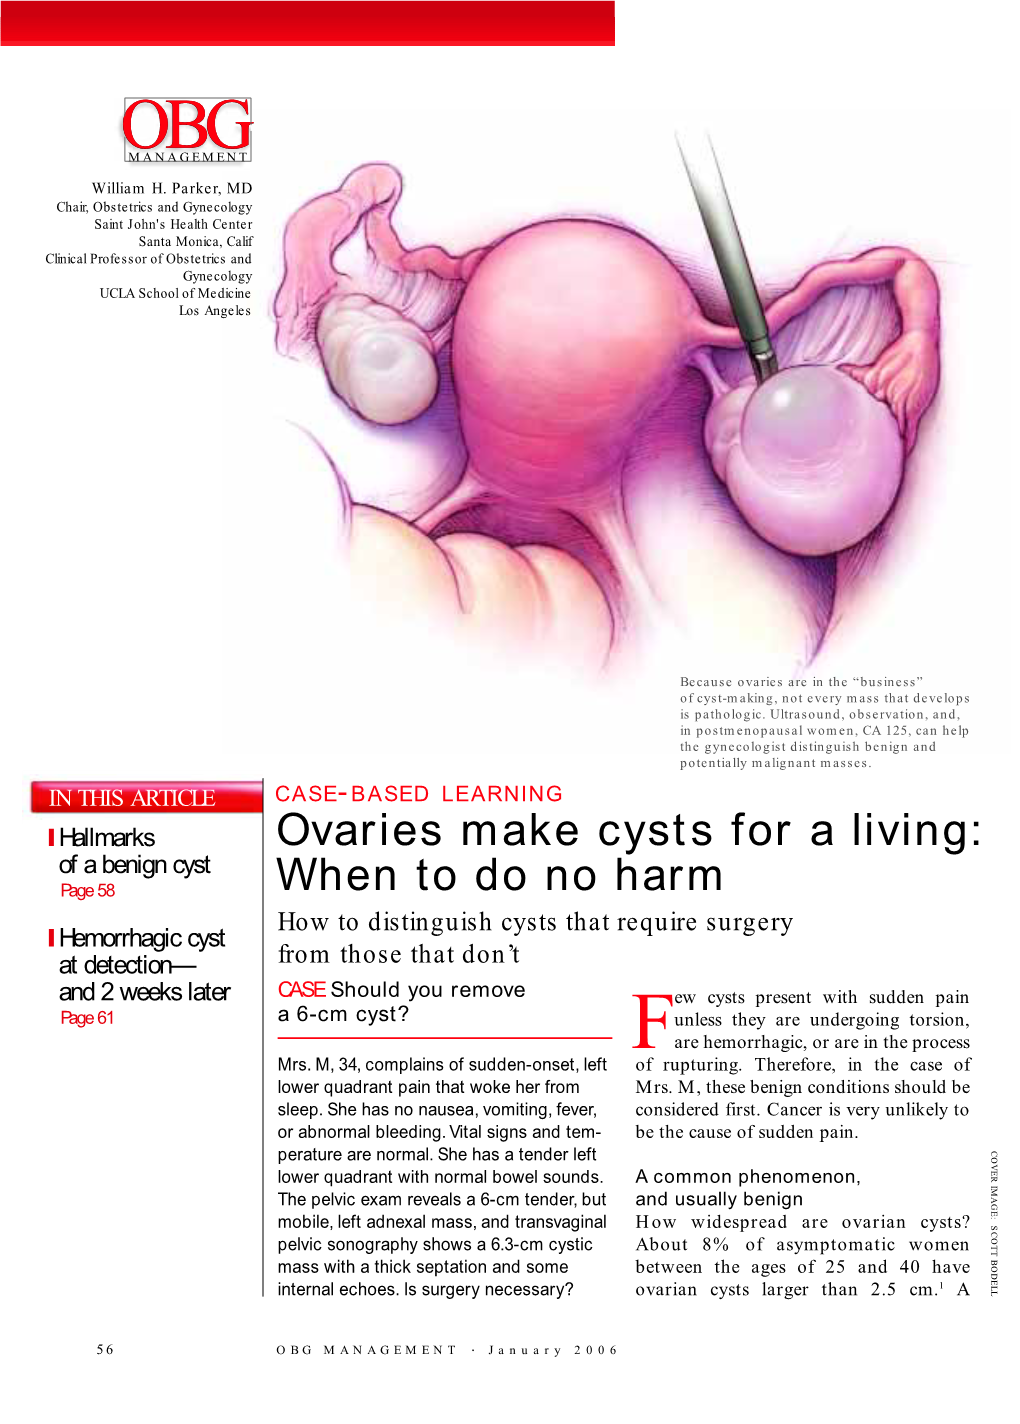 Ovaries Make Cysts for a Living: When to Do No Harm